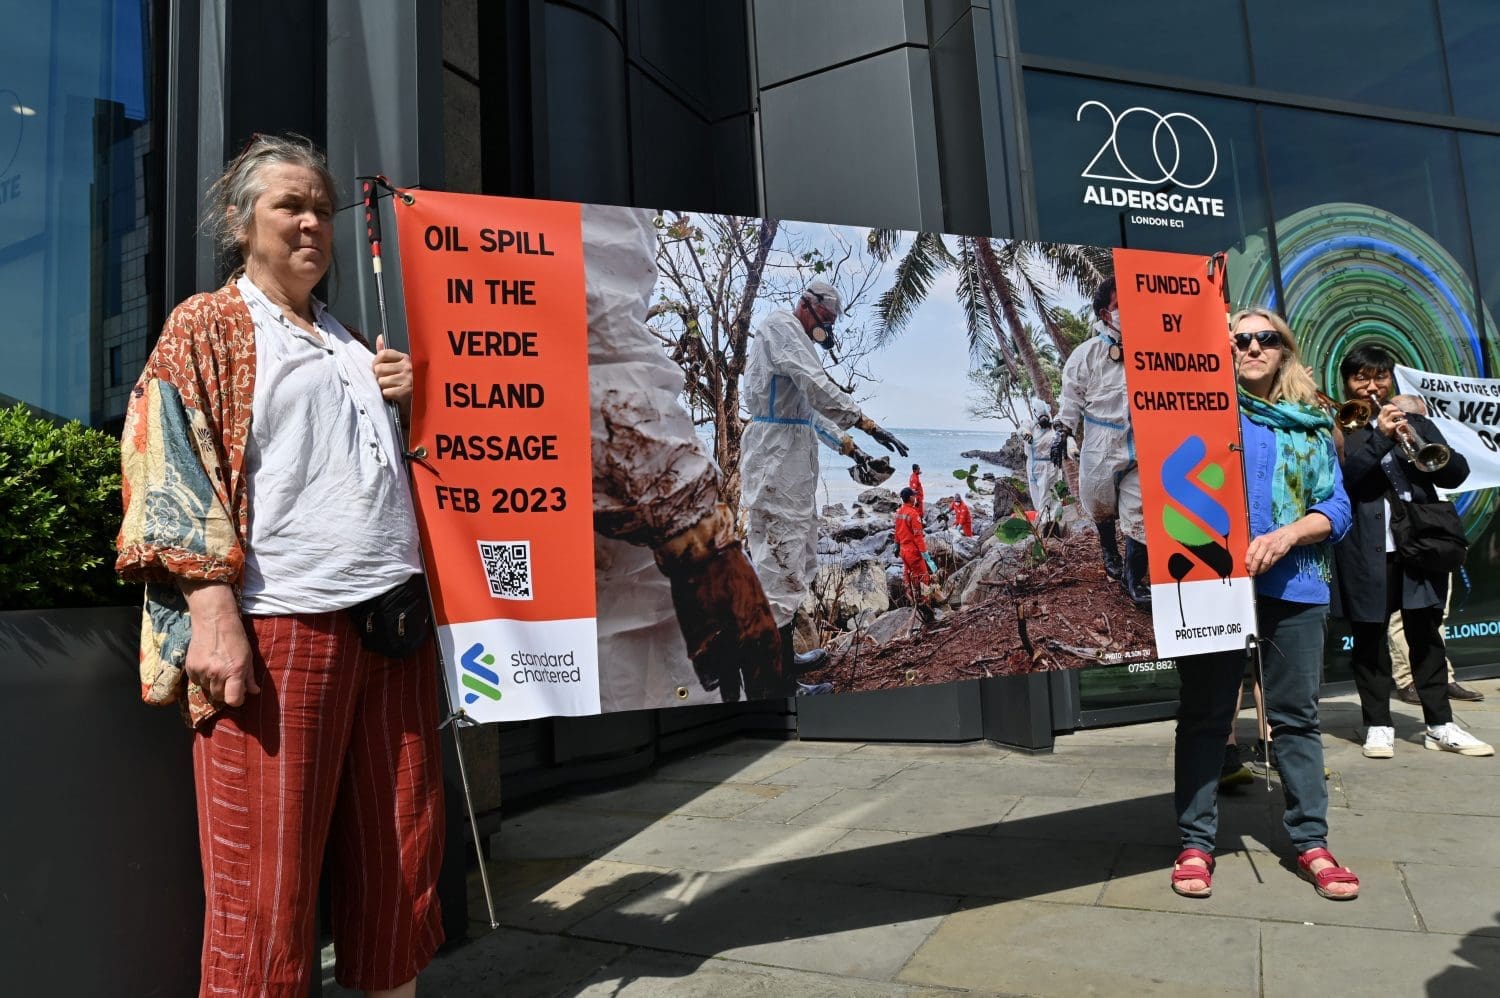 Protesters witha banner that reads: Oil spill in the Verde Island Passage Feb 2023 - Funded by Standard Chartered.